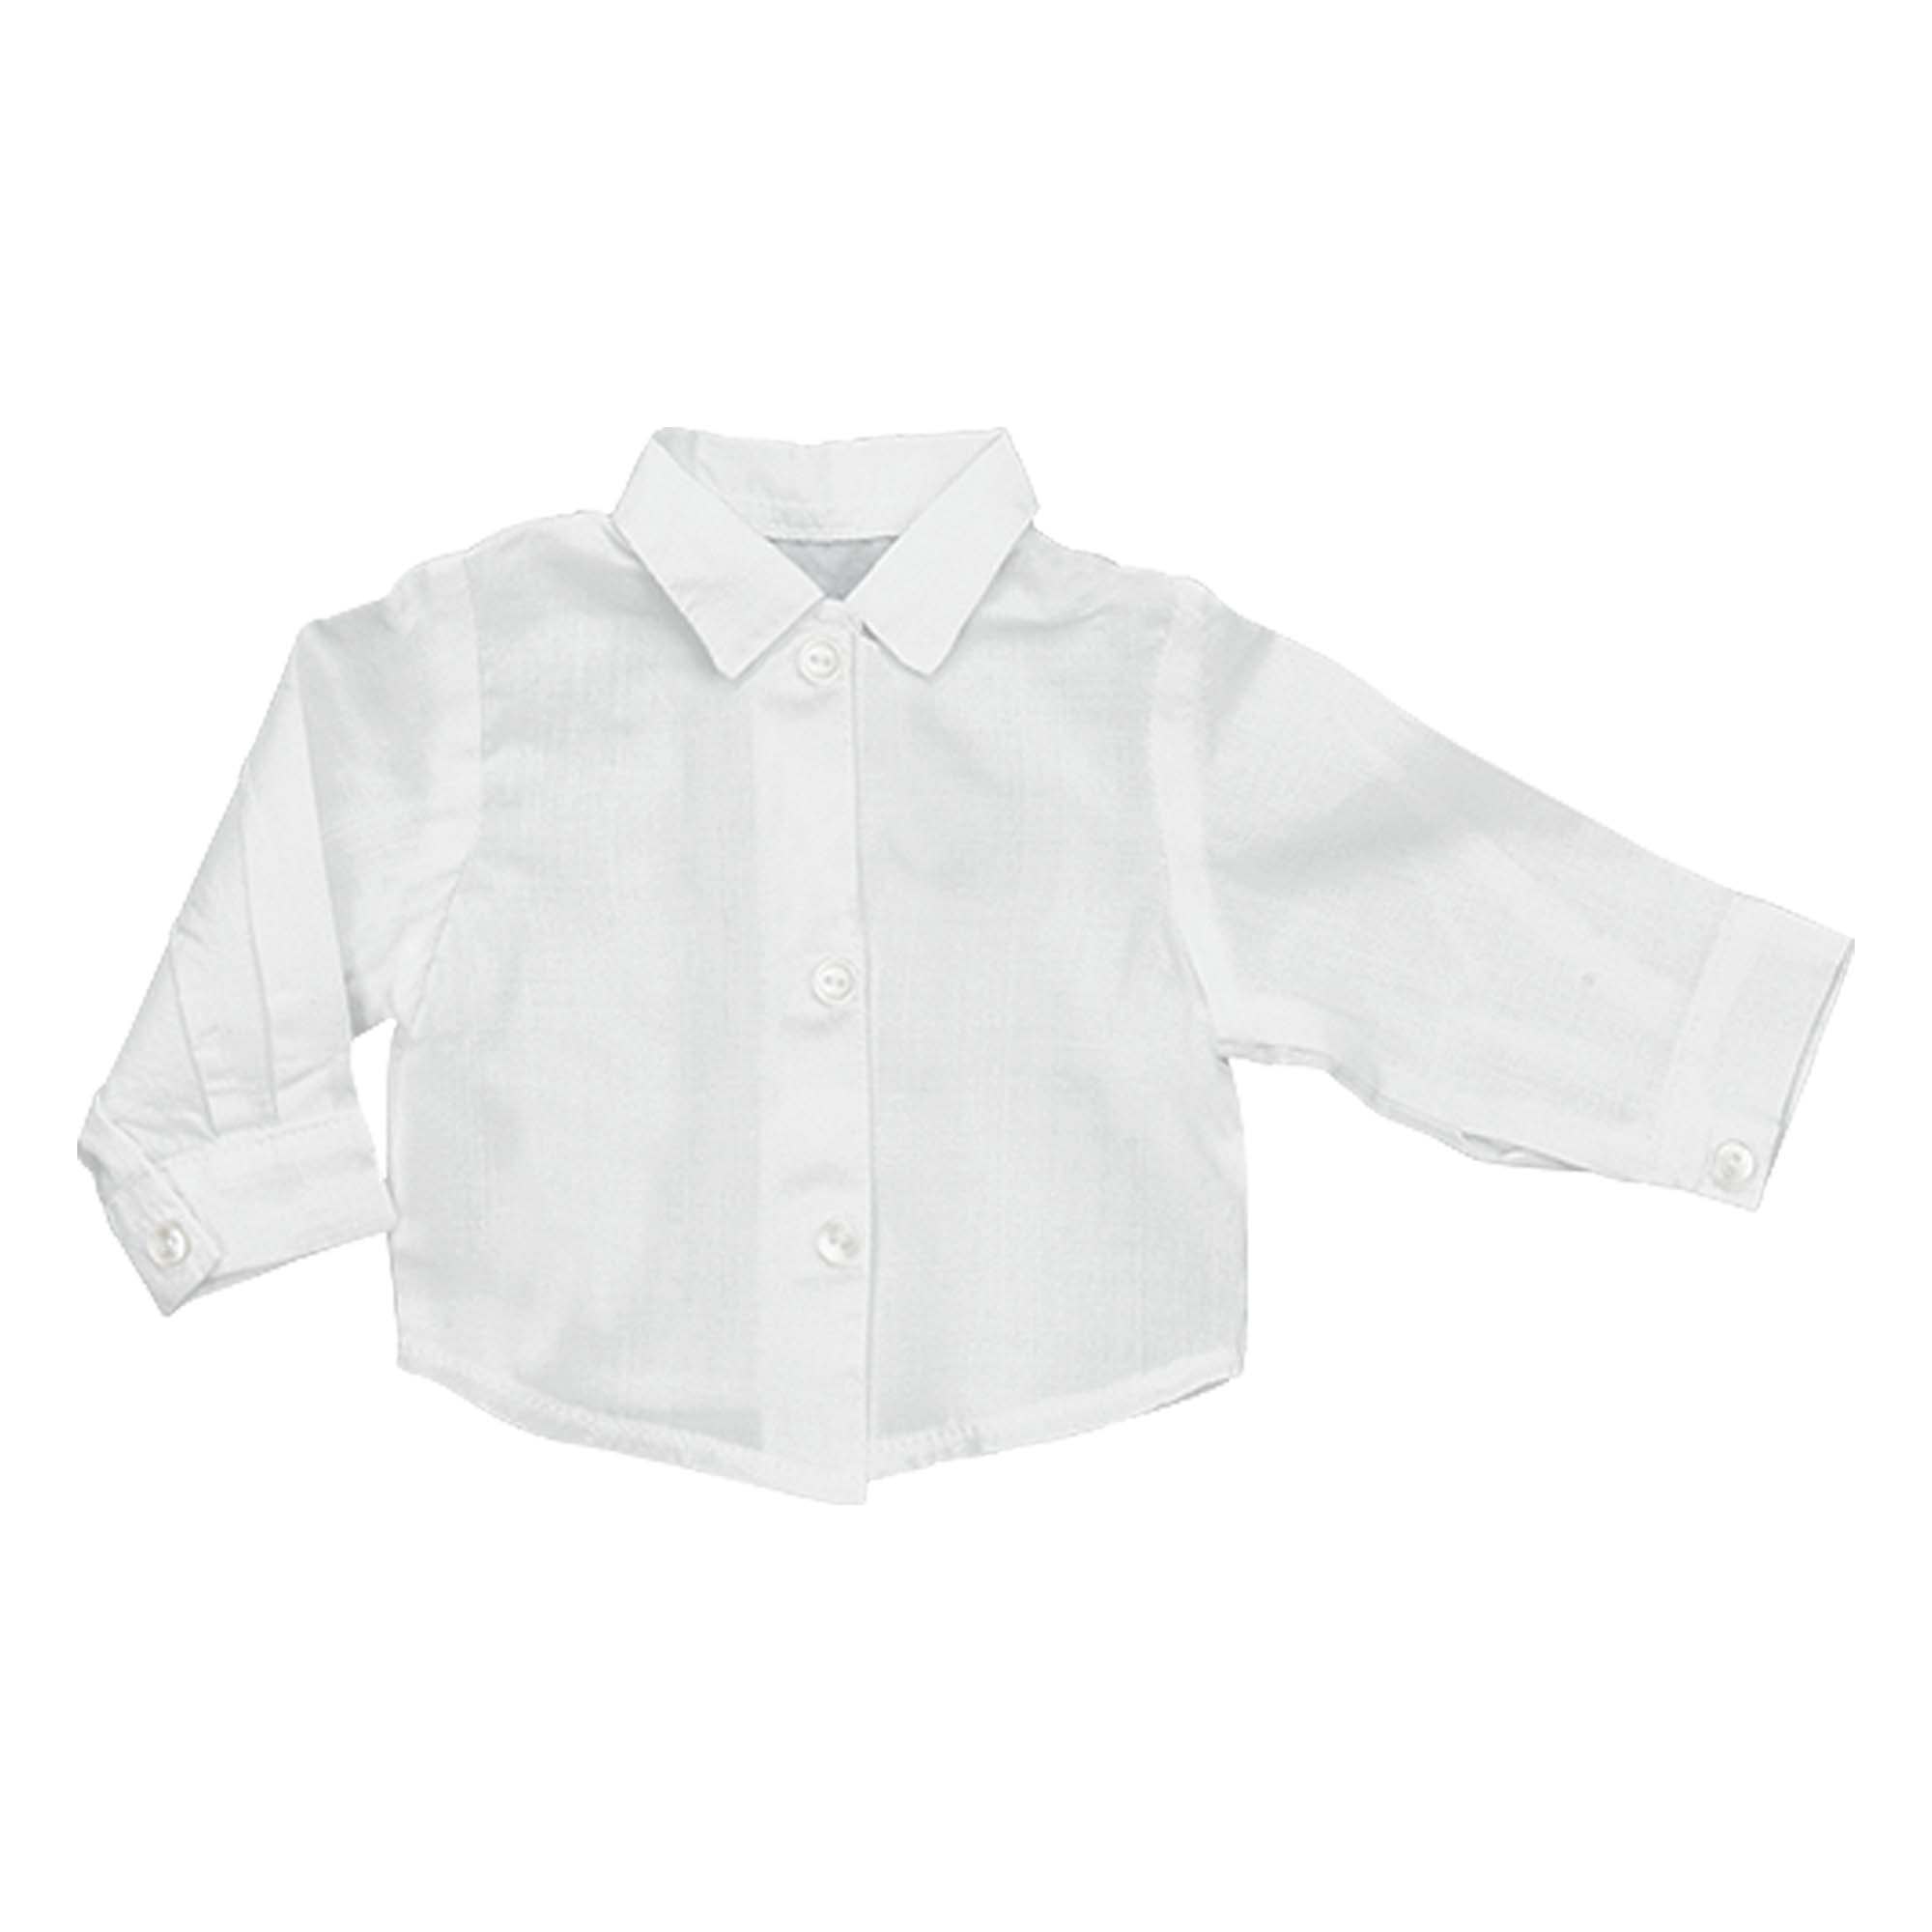 Sophia’s Basic Solid Colored Mix & Match Button Down Long-Sleeved Collared Oxford Formal Dress Shirt for 18” Dolls, White